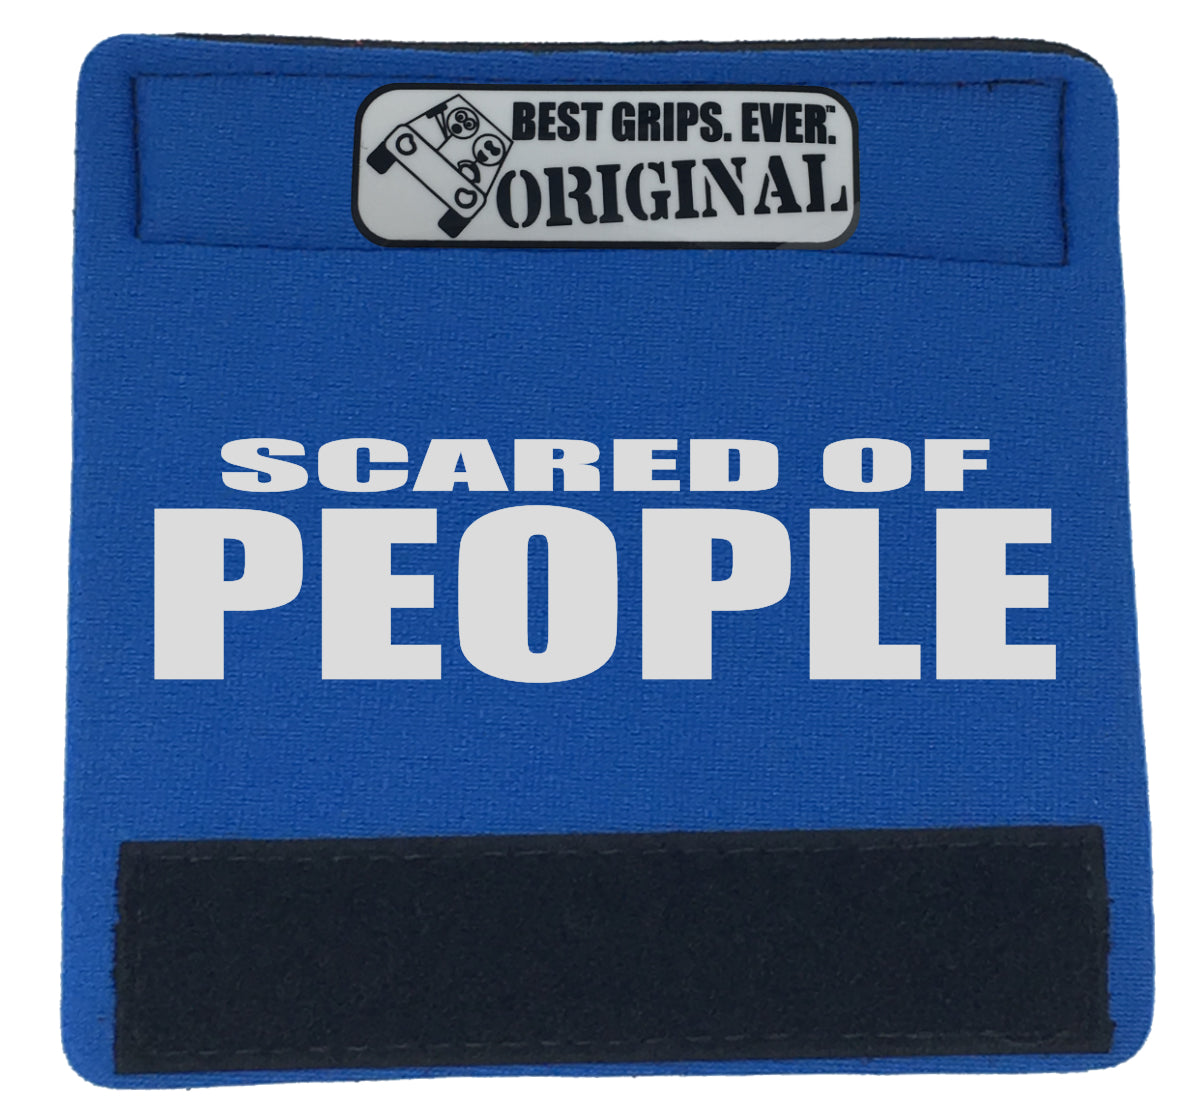 SCARED OF PEOPLE Grip